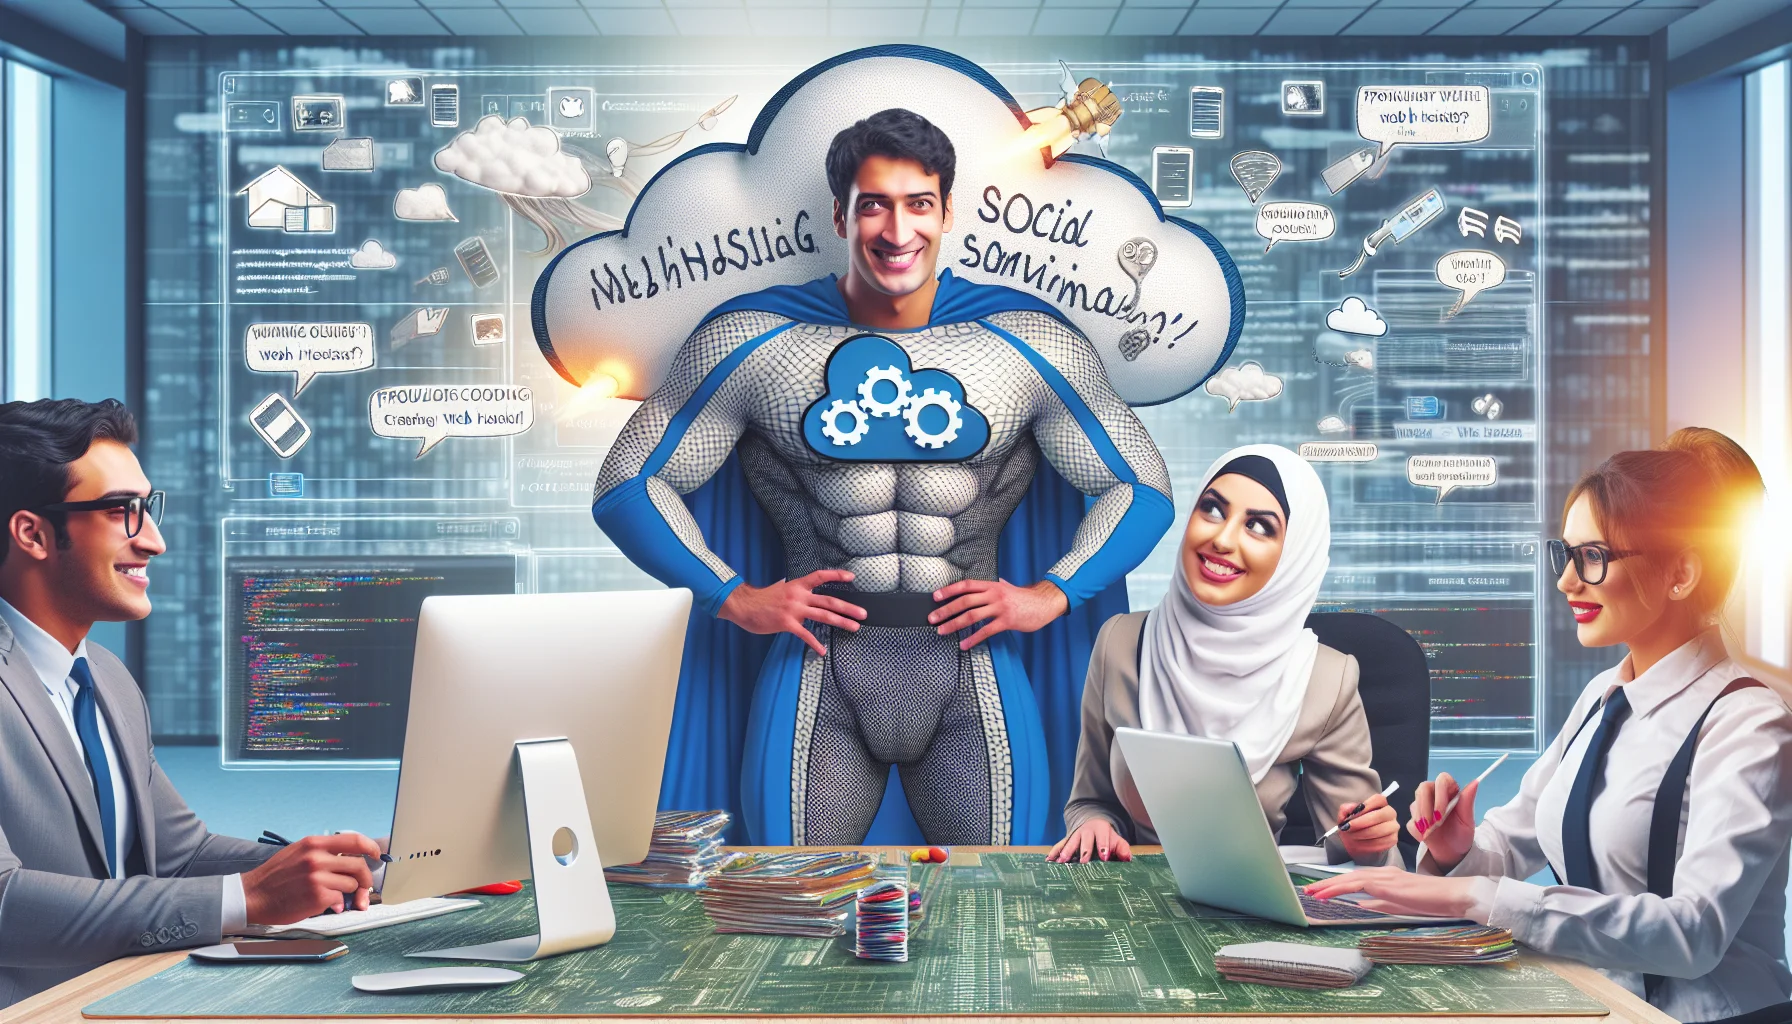 Create a detailed and humorous image of a Middle-Eastern female and a Caucasian male website builder, both with confident smiles, engrossed in creating a social media website. The room around them is filled with snippets of code floating in the air, and a gigantic, superhero-like website mascot detailing enticing attributes of web hosting. The mascot, comically dressed in a 'cloud' costume, is displaying popular web hosting icons on his elaborate cloud cape. Everything is set in a light-hearted, semi-futuristic office environment with computers, tablets, and futuristic holographic screens all around.